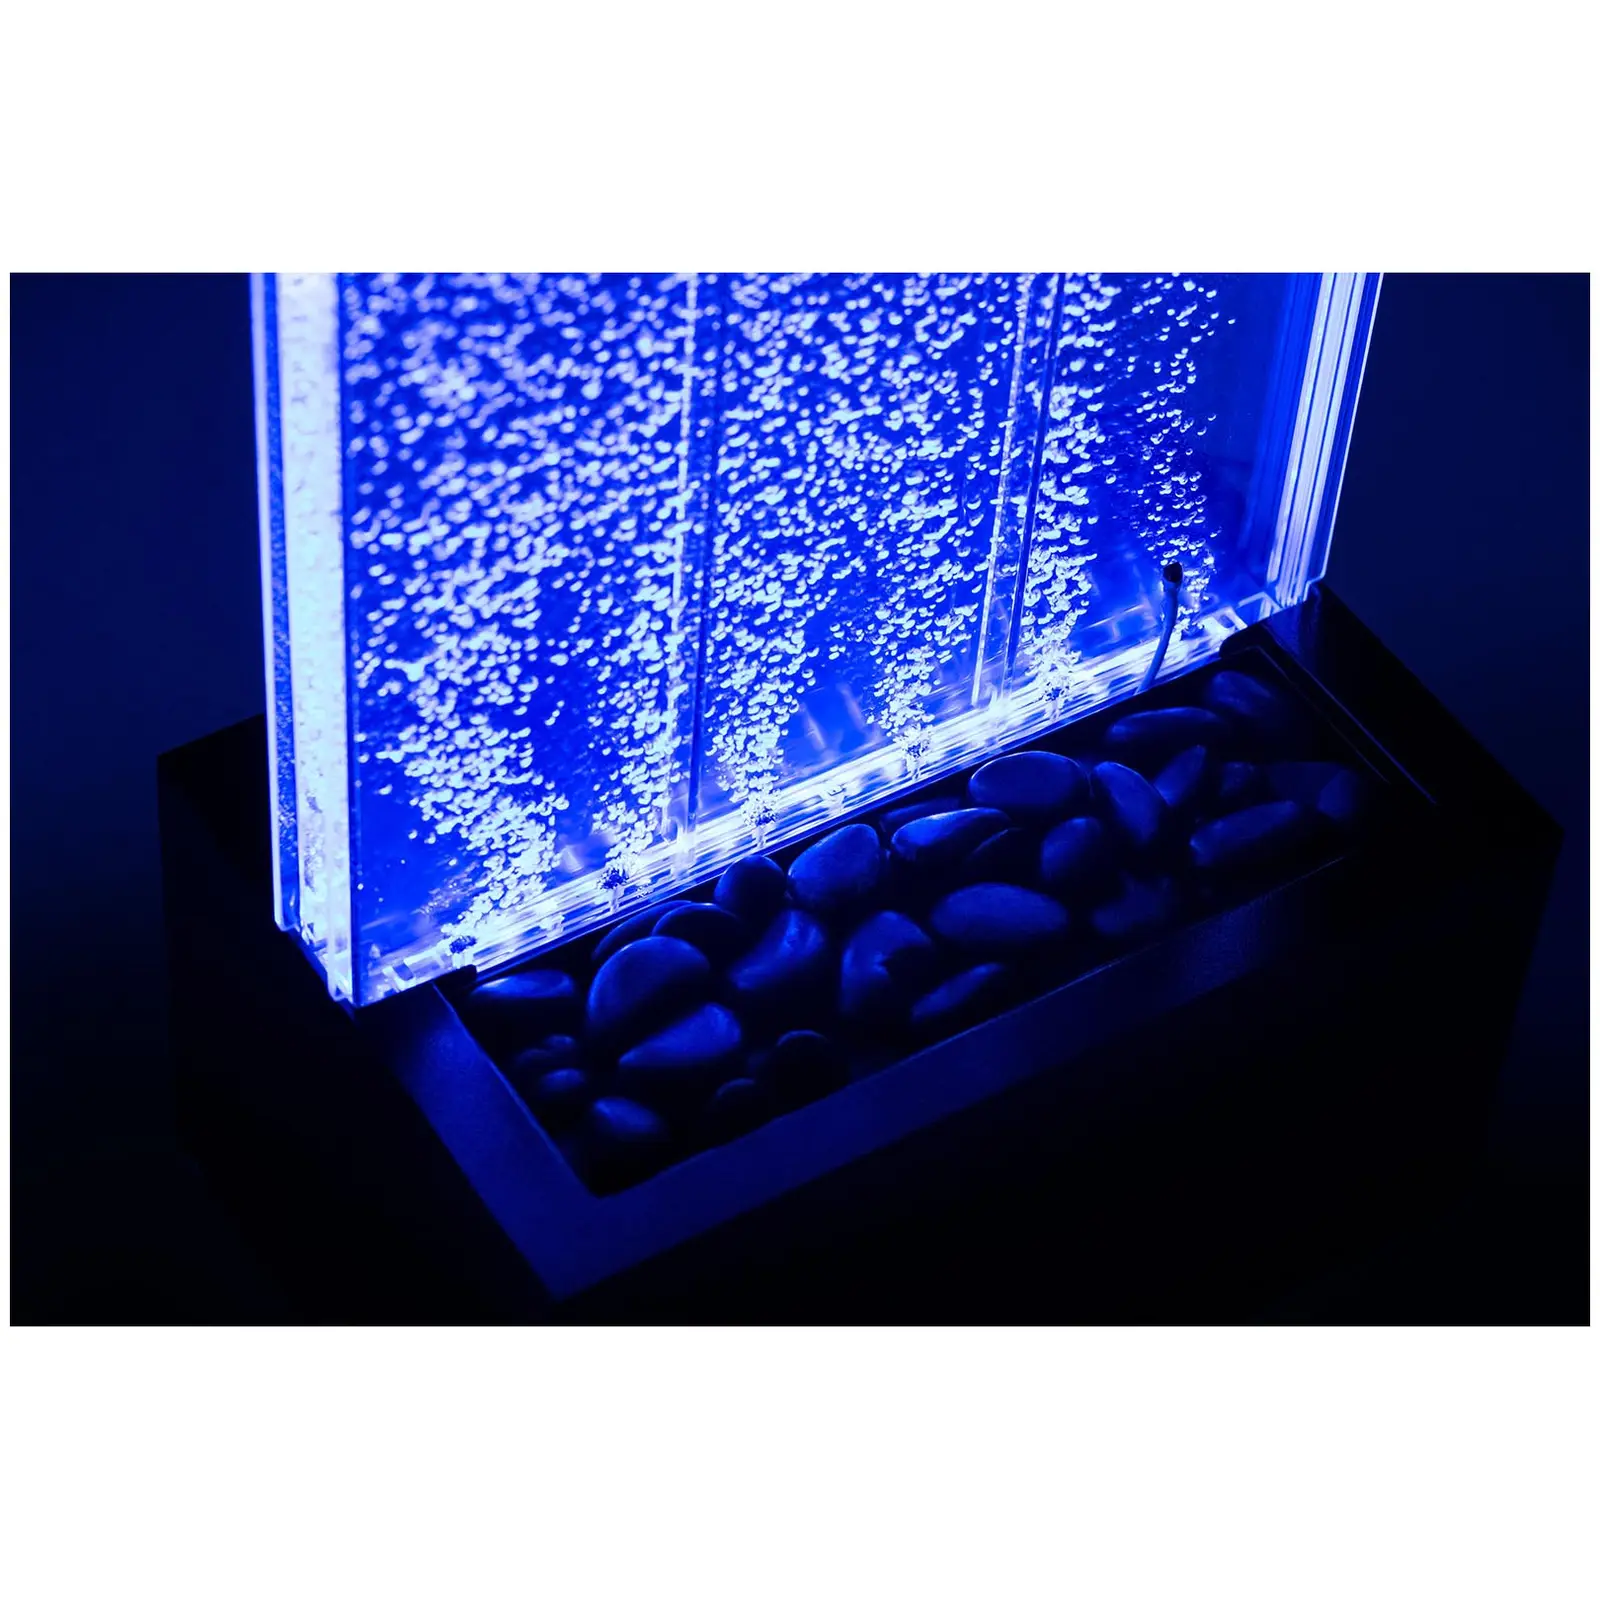 LED Water Wall - 390 x 260 x 200 mm